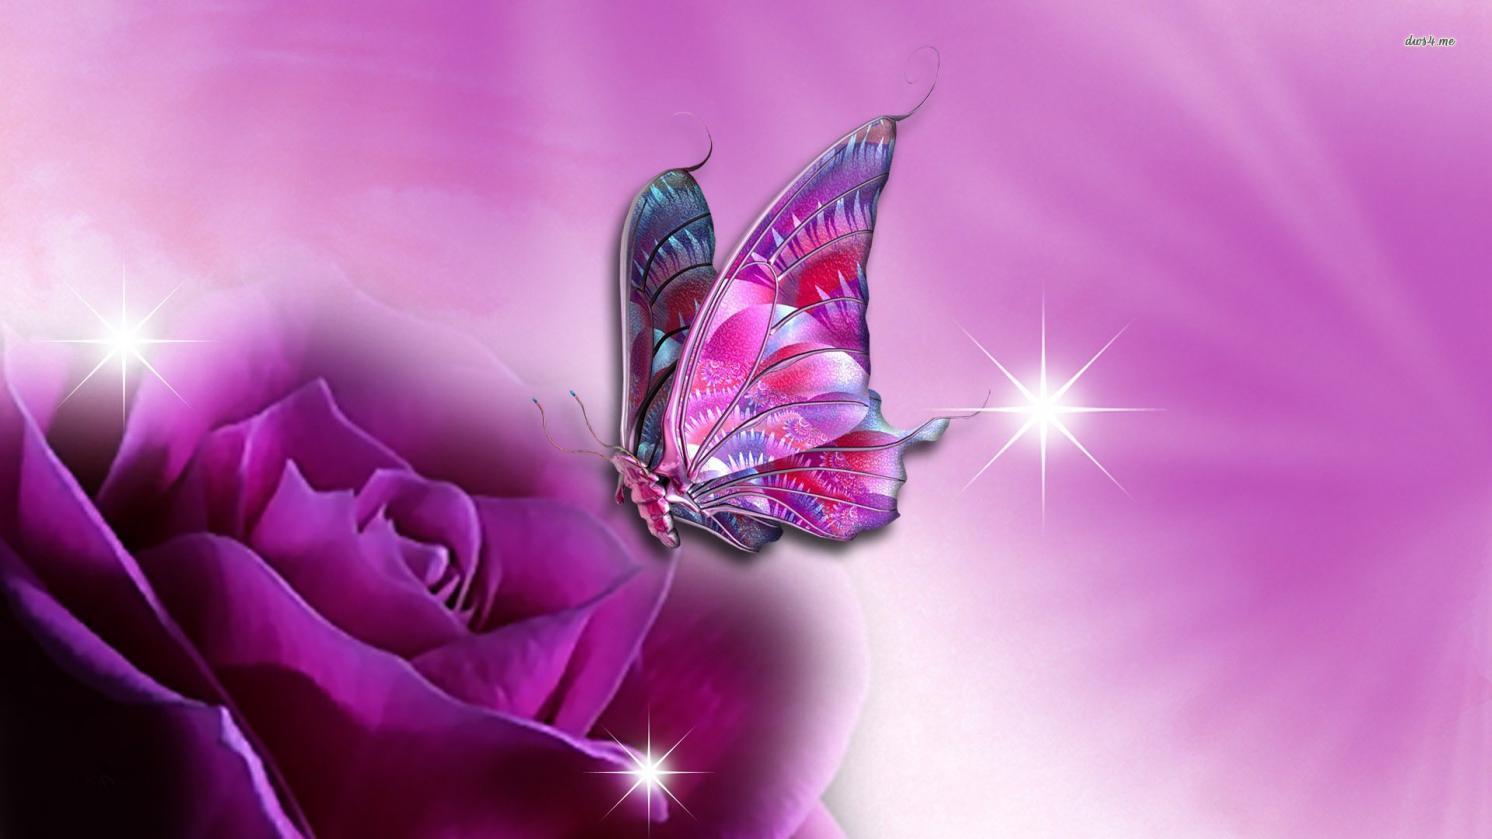 Wallpaper For > Purple And Black Butterfly Wallpaper